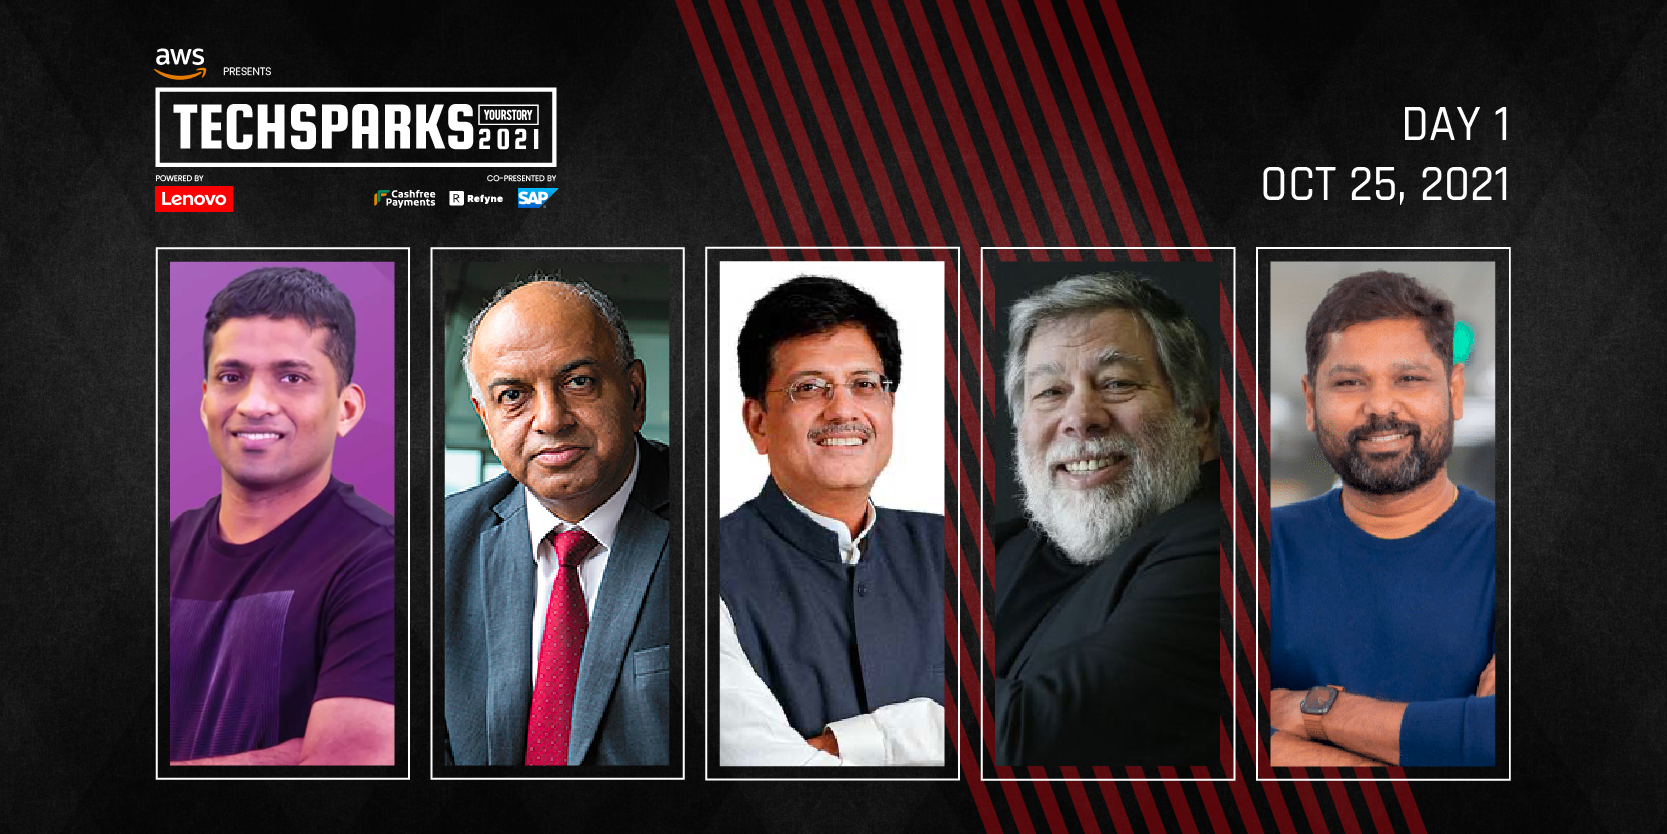 Key takeaways from Piyush Goyal, Steve Wozniak, Girish Mathrubootham, and more: All you need to know from Day 1 of TechSparks 2021